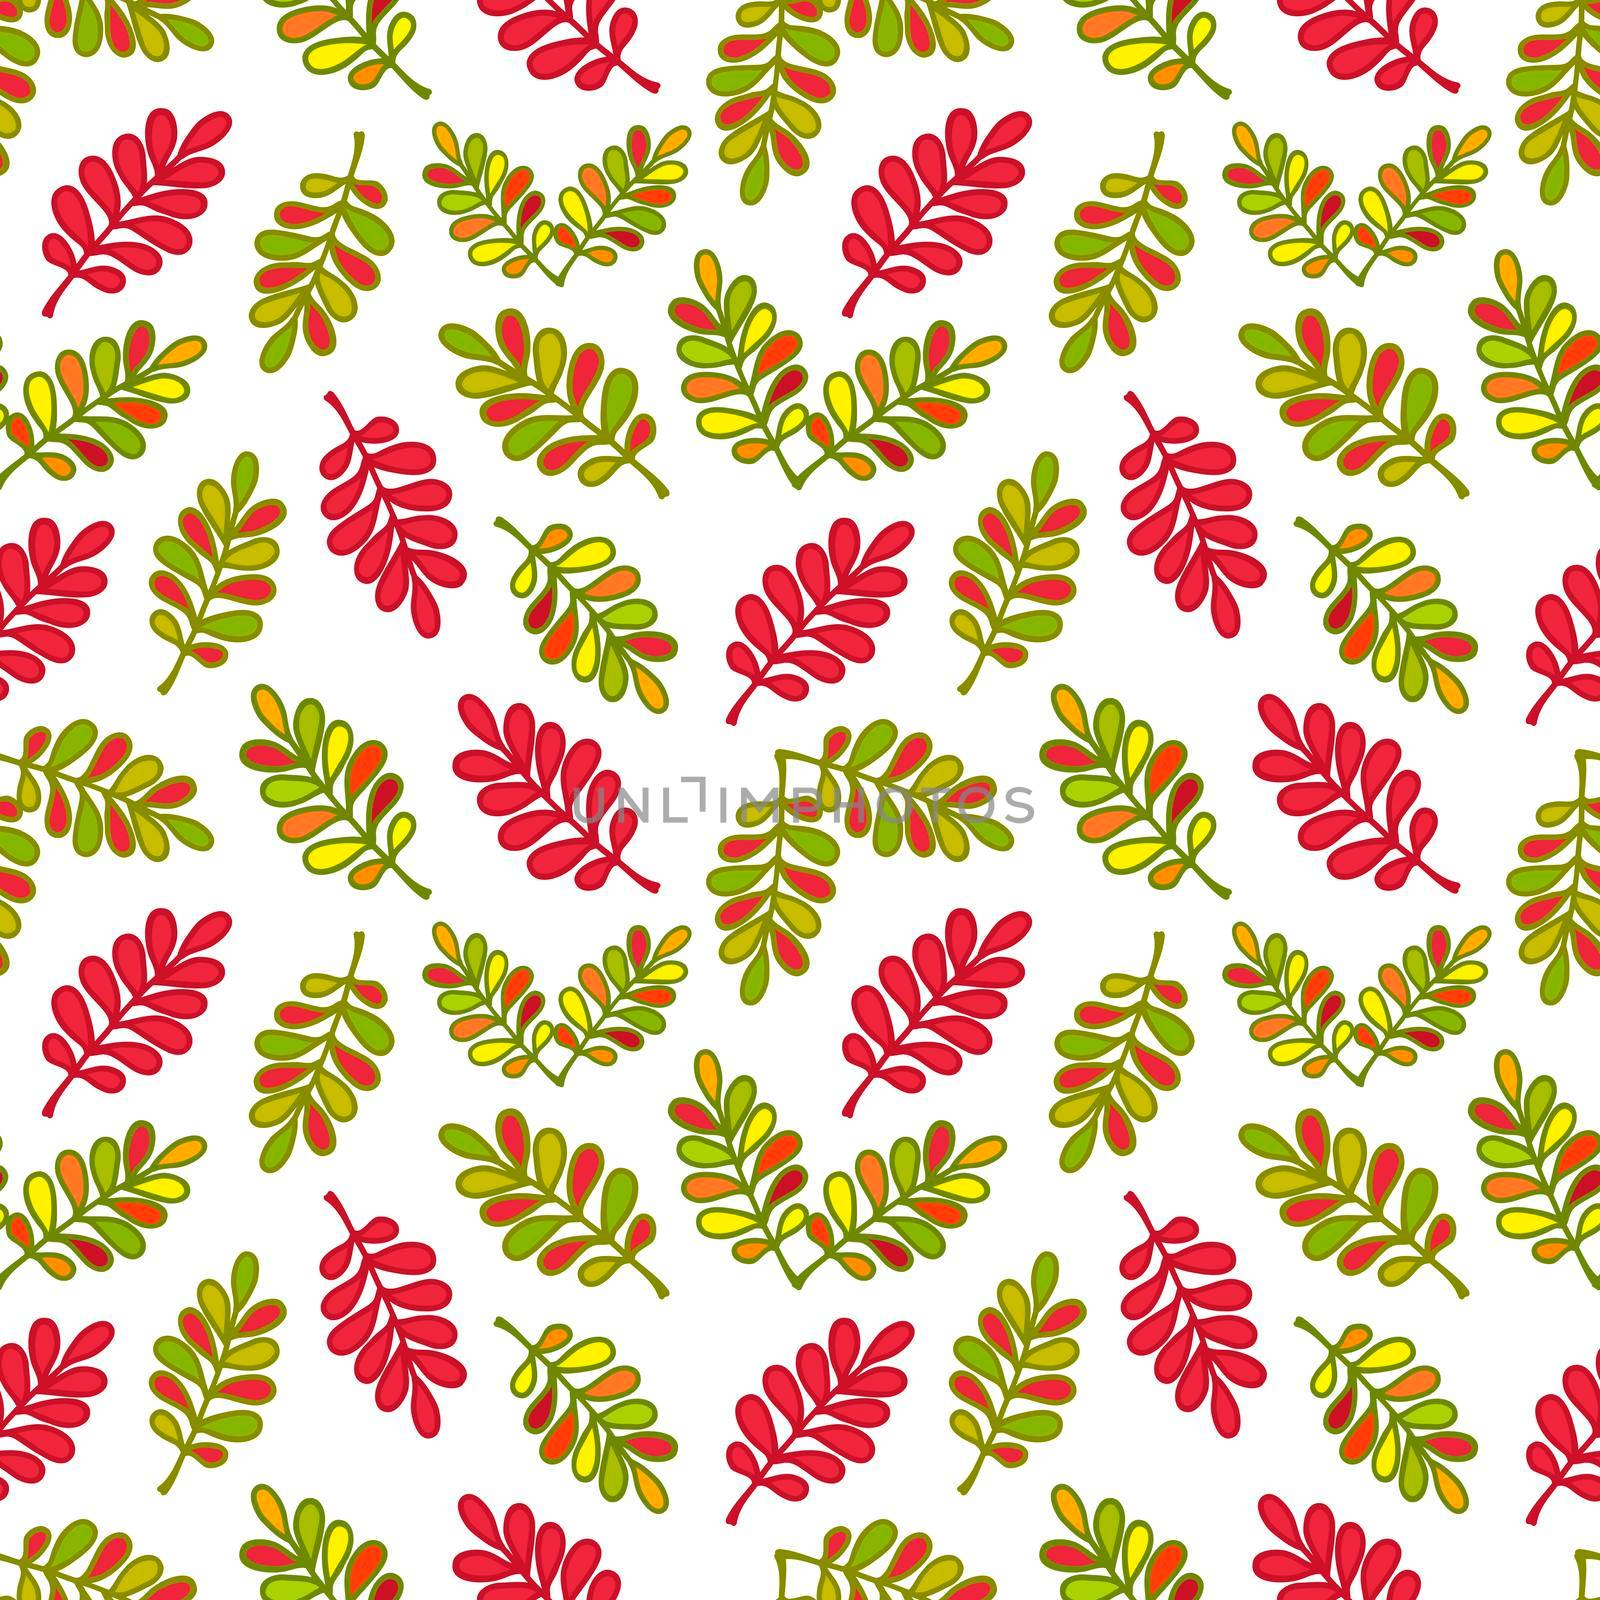 Seamless pattern with stylized abstract leaves of mountain ash or acacia for wrapping paper, wallpaper, textiles, web page background and more. illustration. .